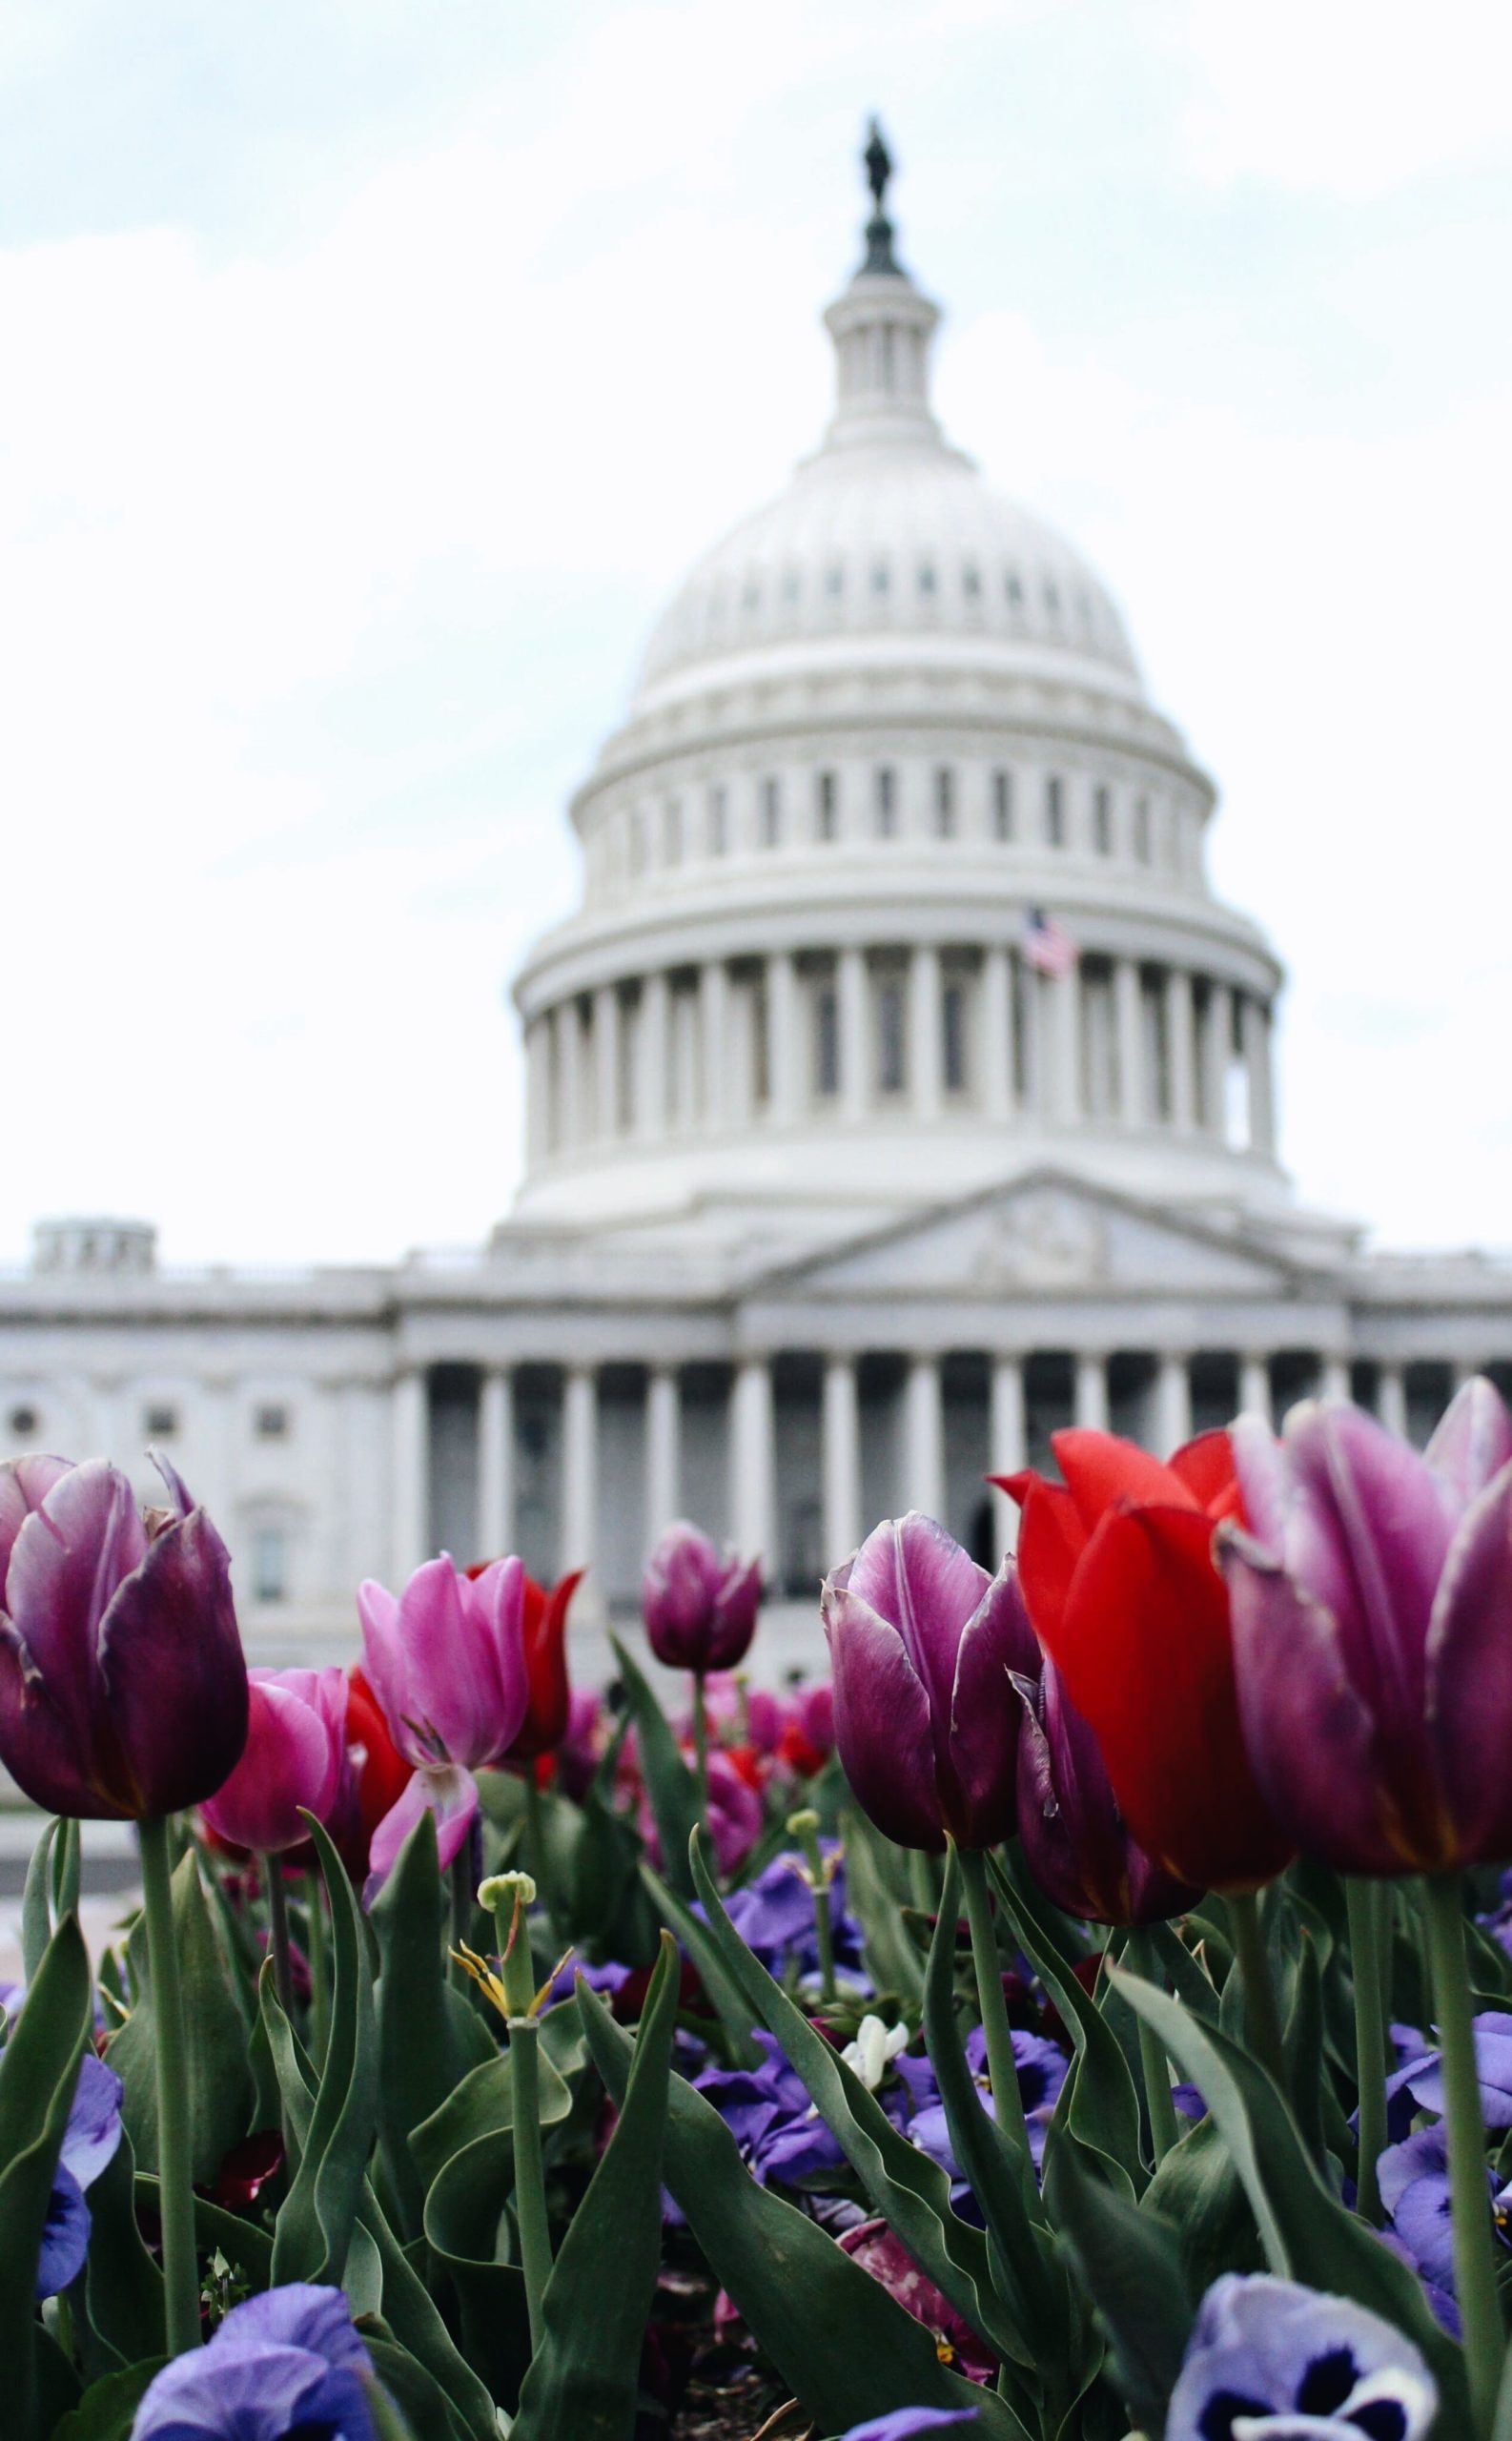 Blooming tulips sit in the foreground of this shot of the U.S. Capitol